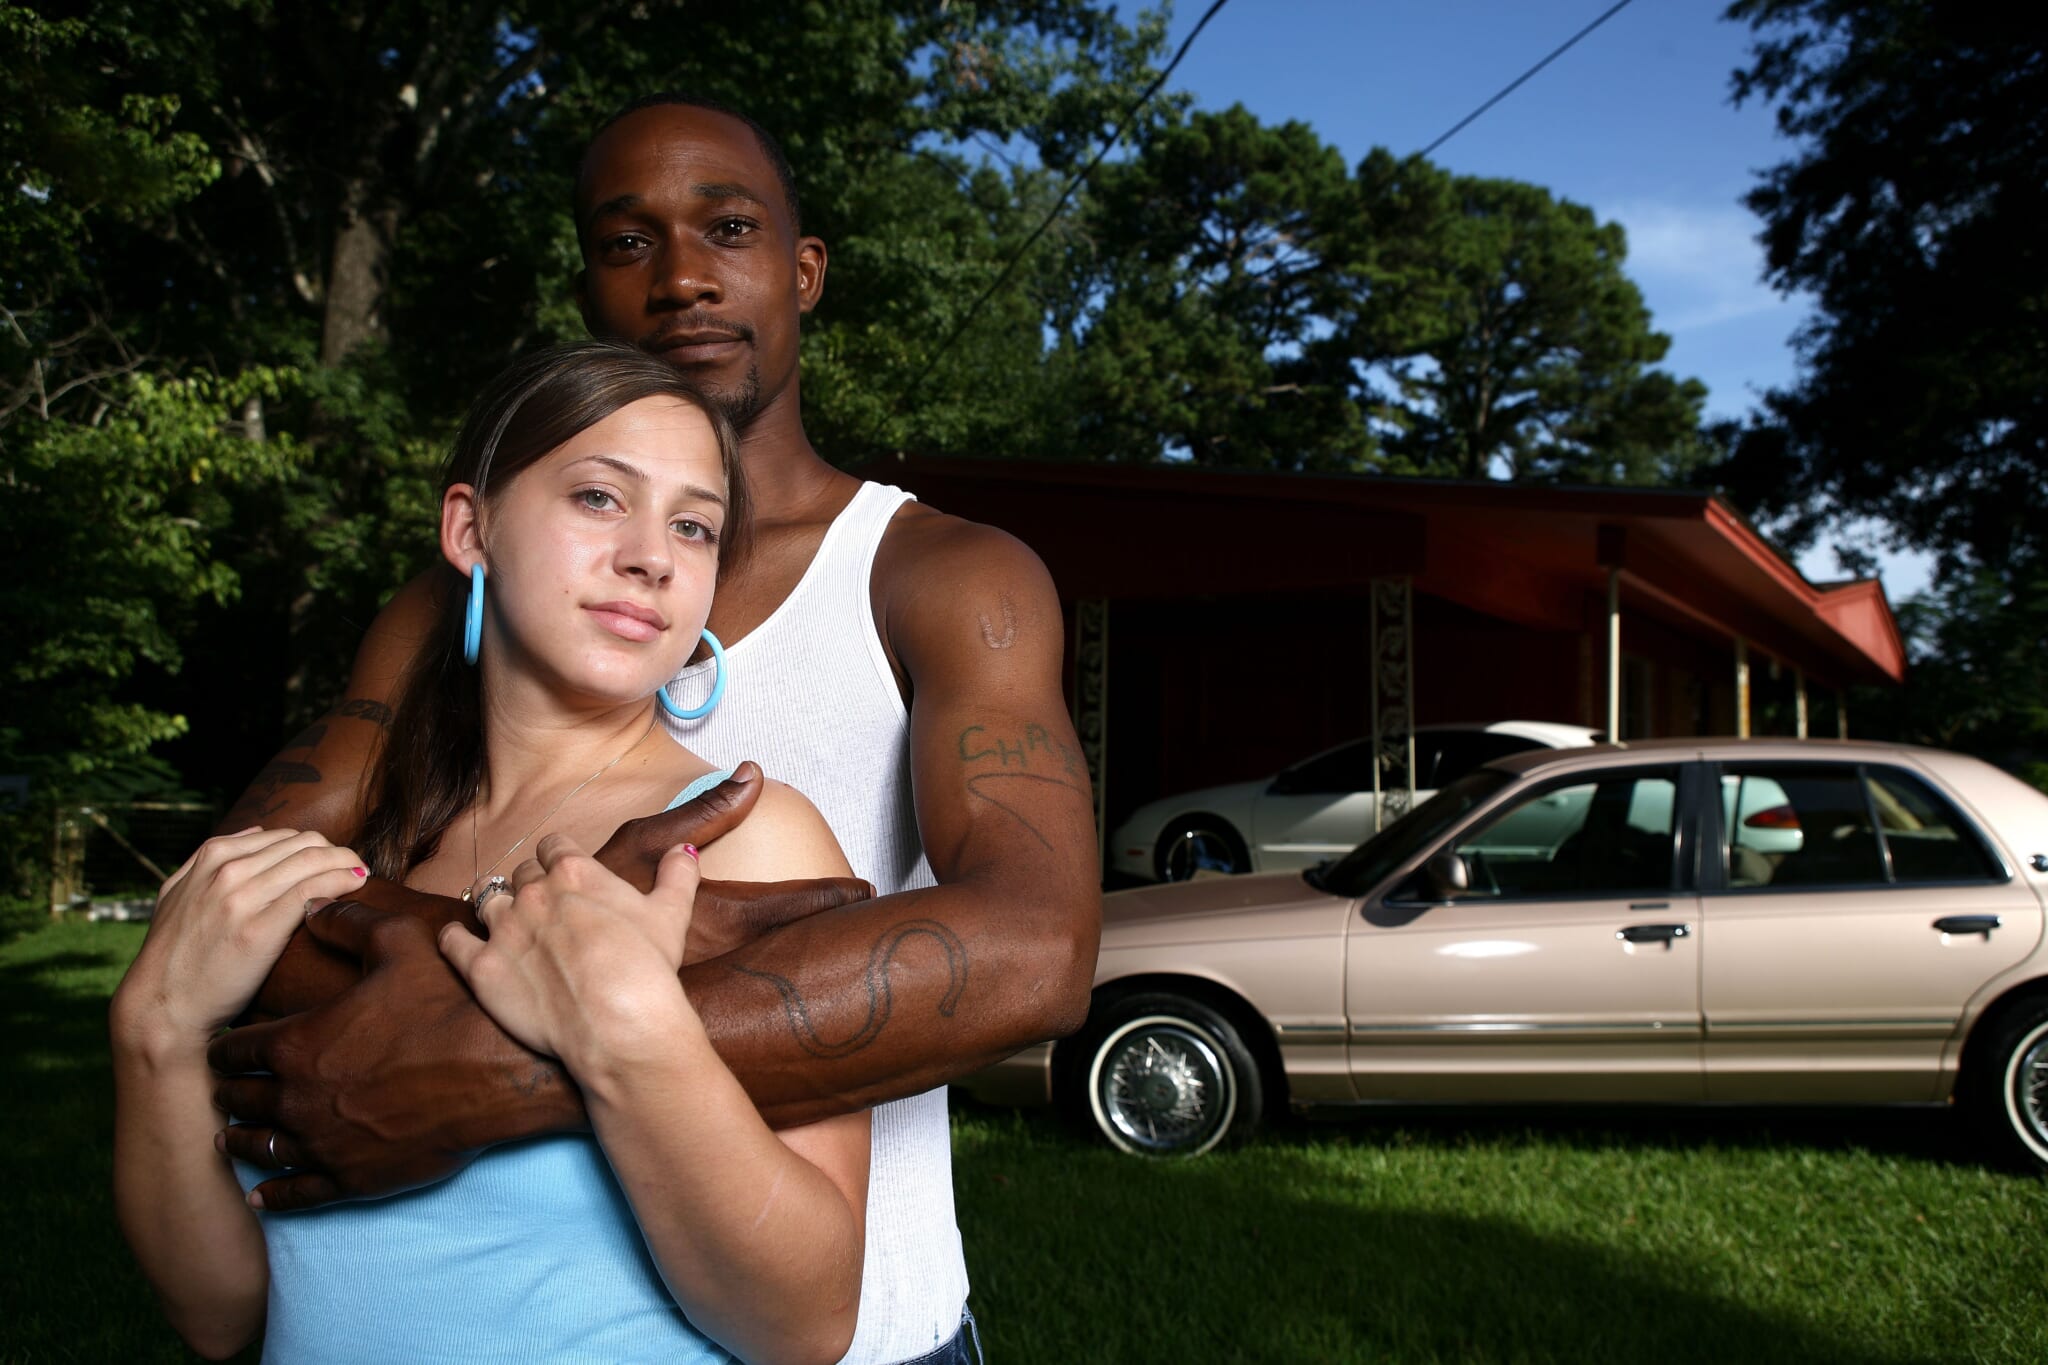 Interracial Relationships That Changed History